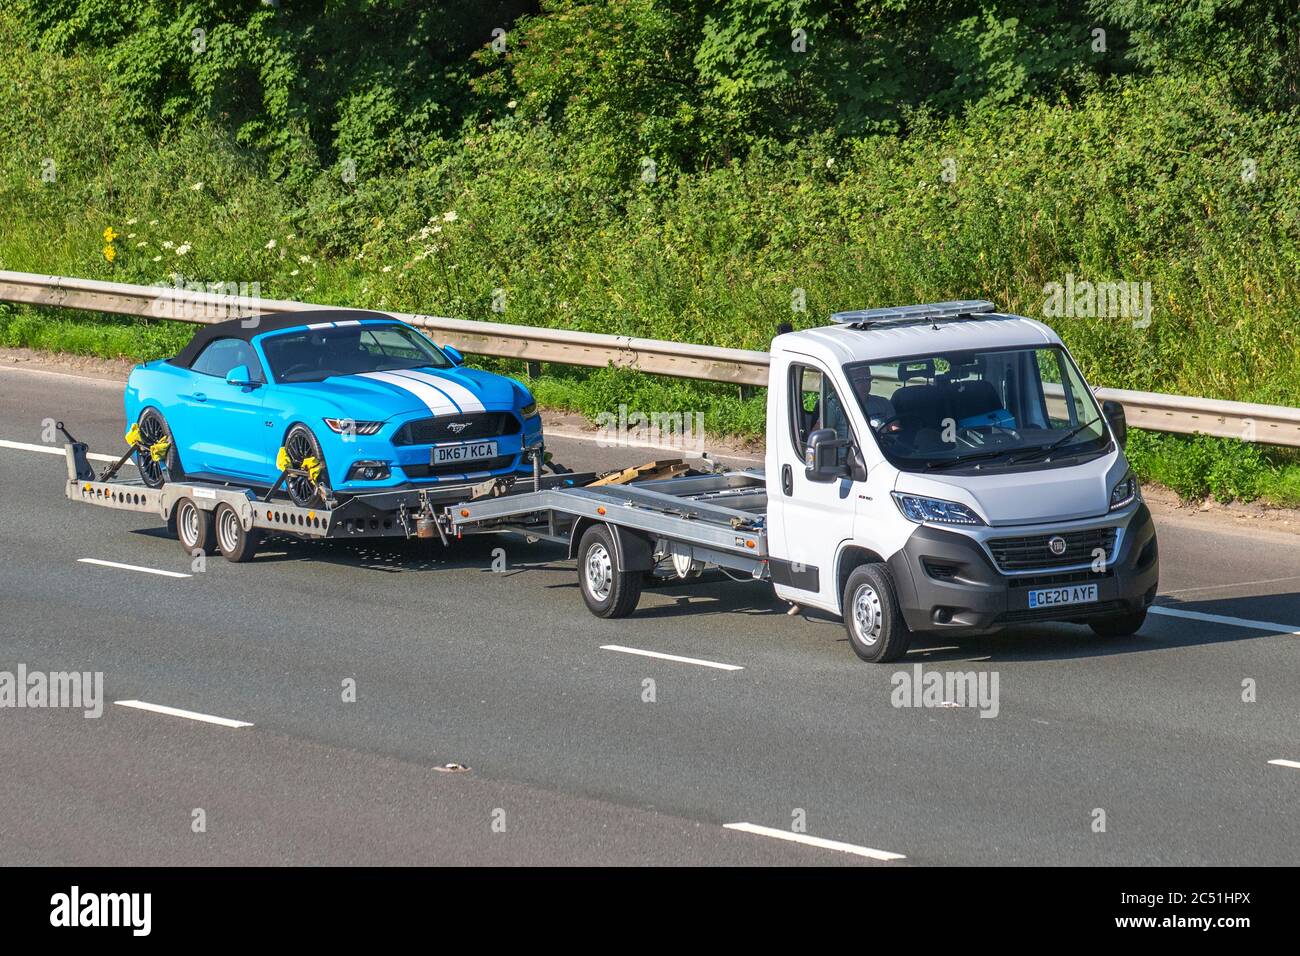 2017 blue white Ford Mustang GT V8 towed by new 2020 white Fiat Ducato 2.3 130bhp Recovery Truck Car Transporter Euro 6;  Vehicular traffic on tow, moving vehicles, cars driving vehicle towing car trailer on UK roads, motors, motoring on the M6 motorway Stock Photo